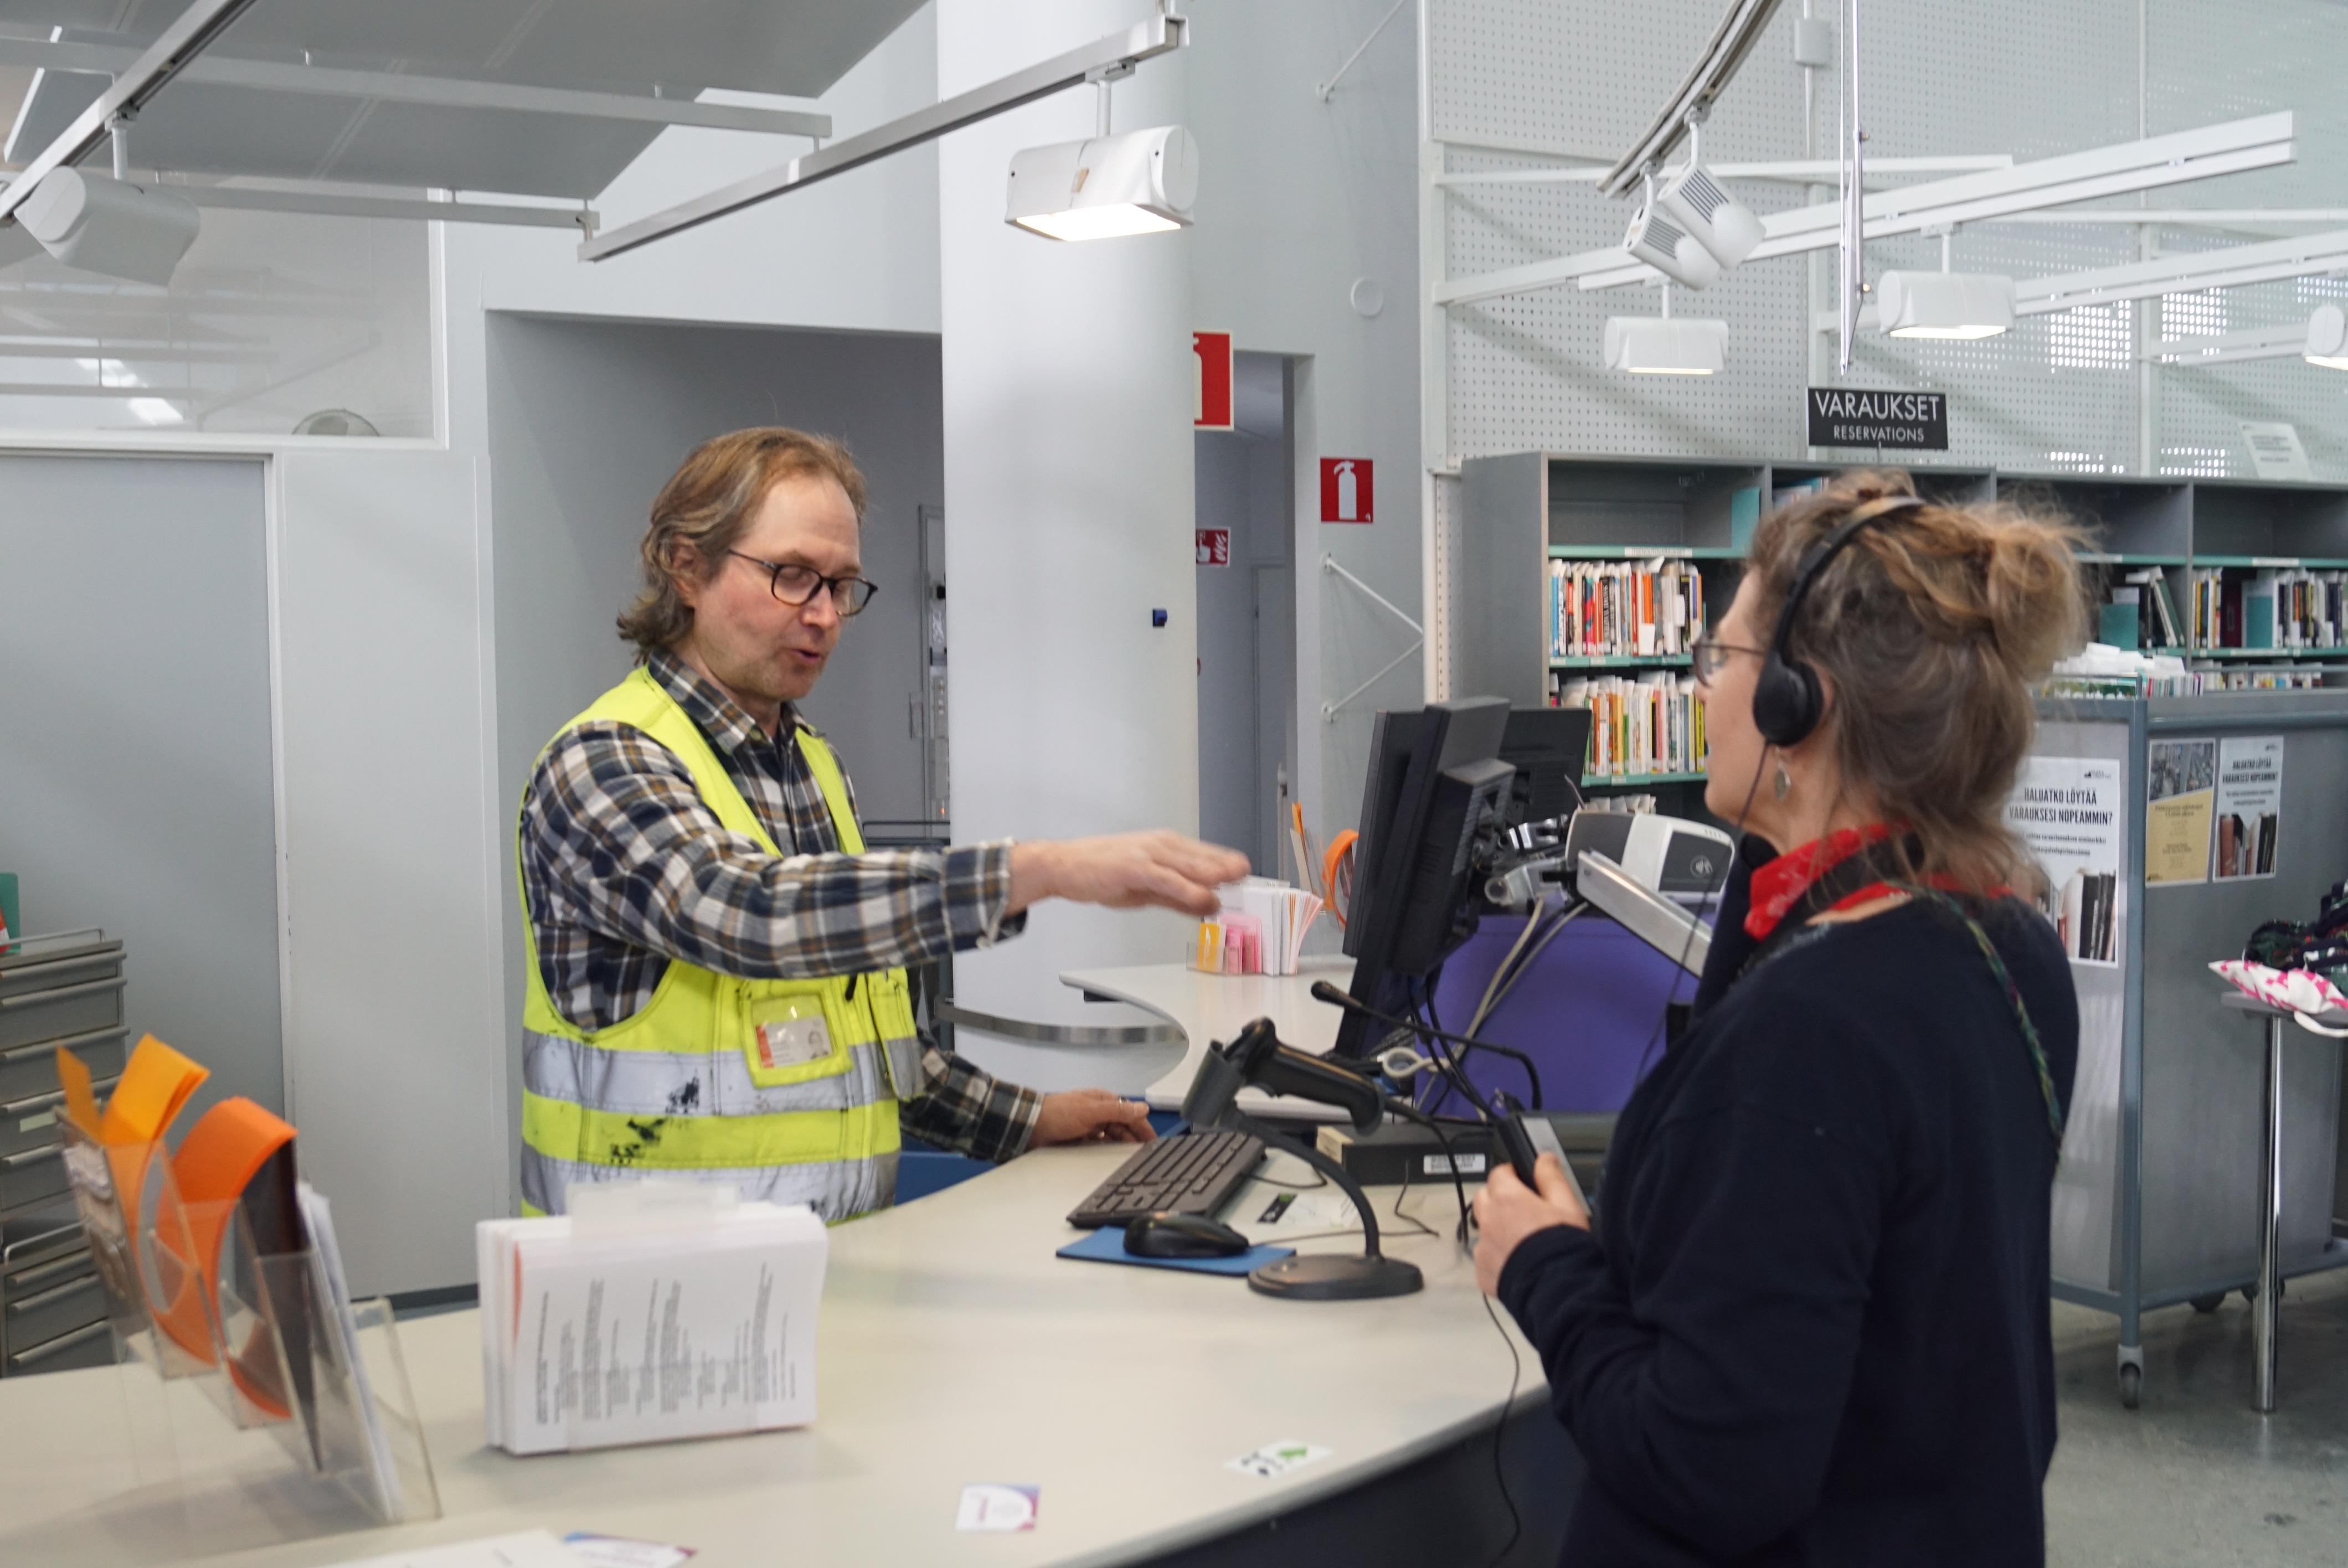 Ari Törmä shows member of library staff how the induction loop works